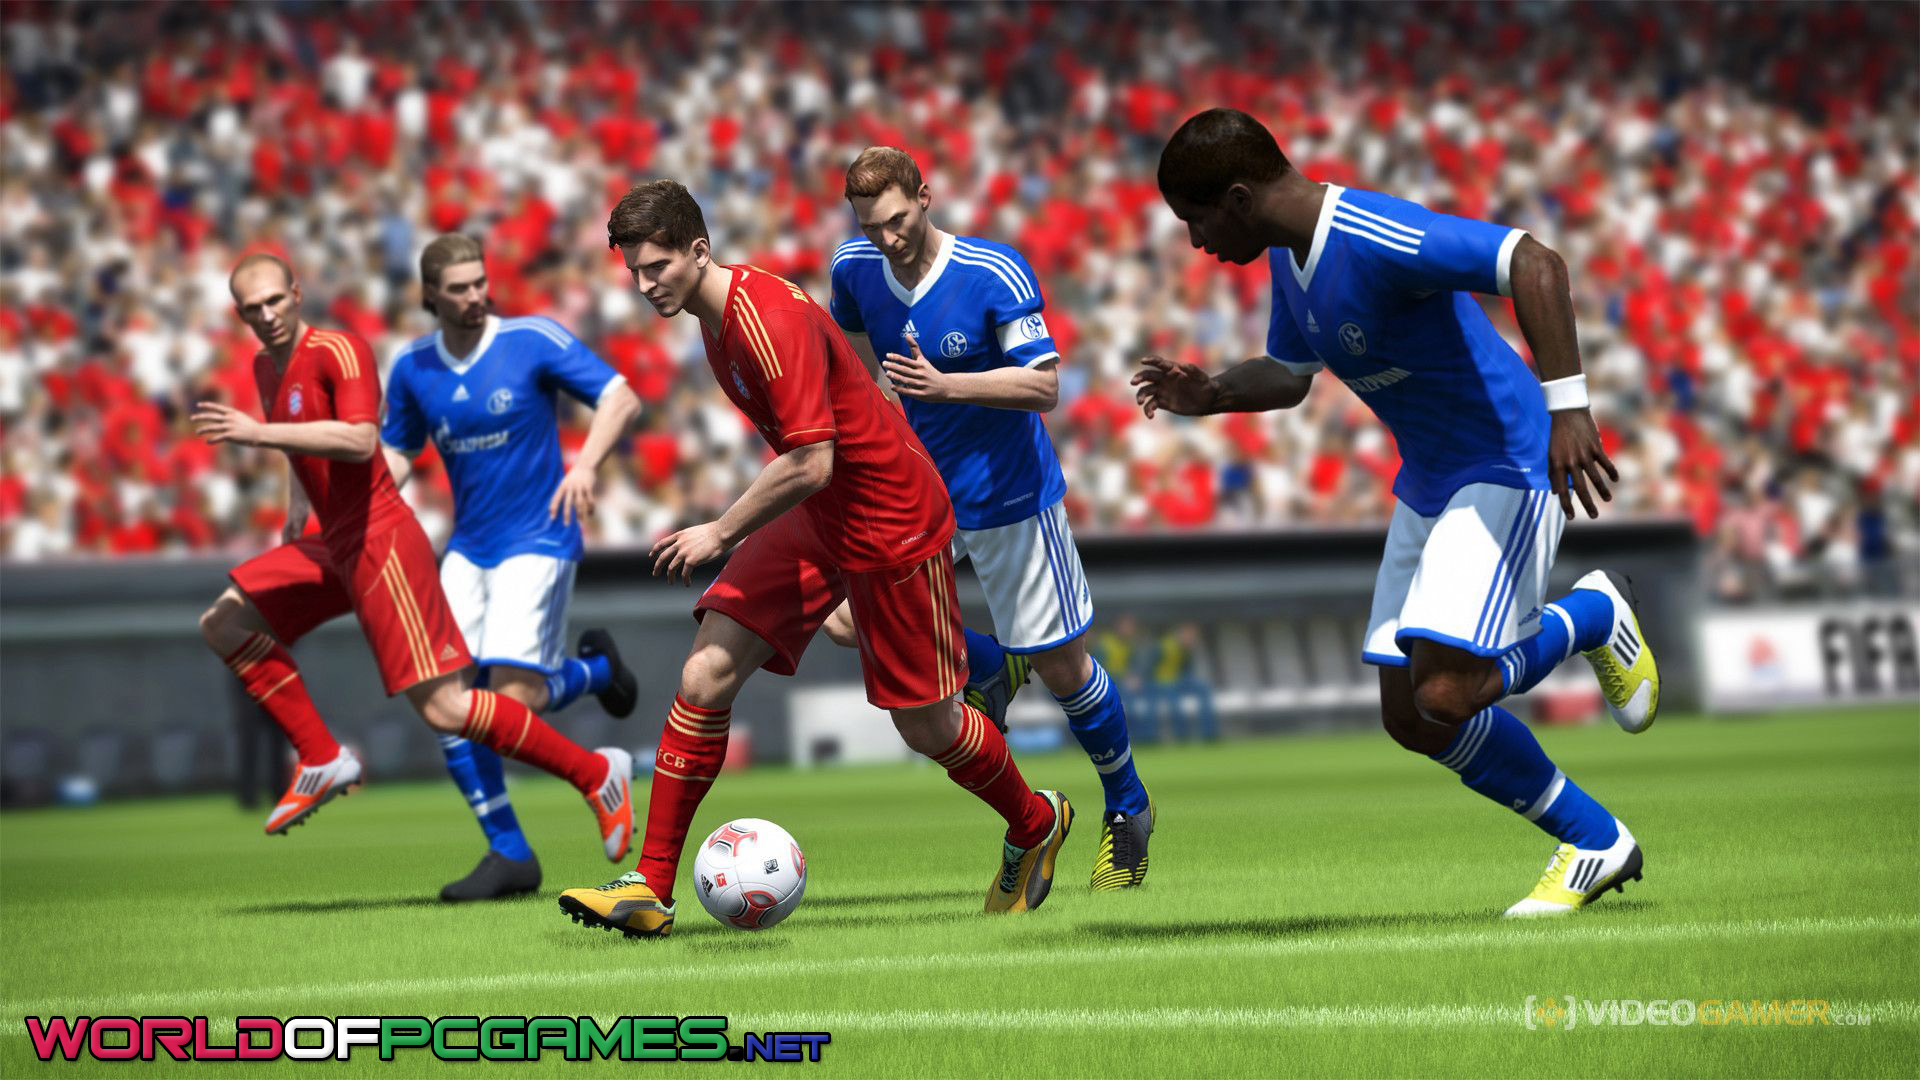 FIFA 13 Free Download By worldof-pcgames.net